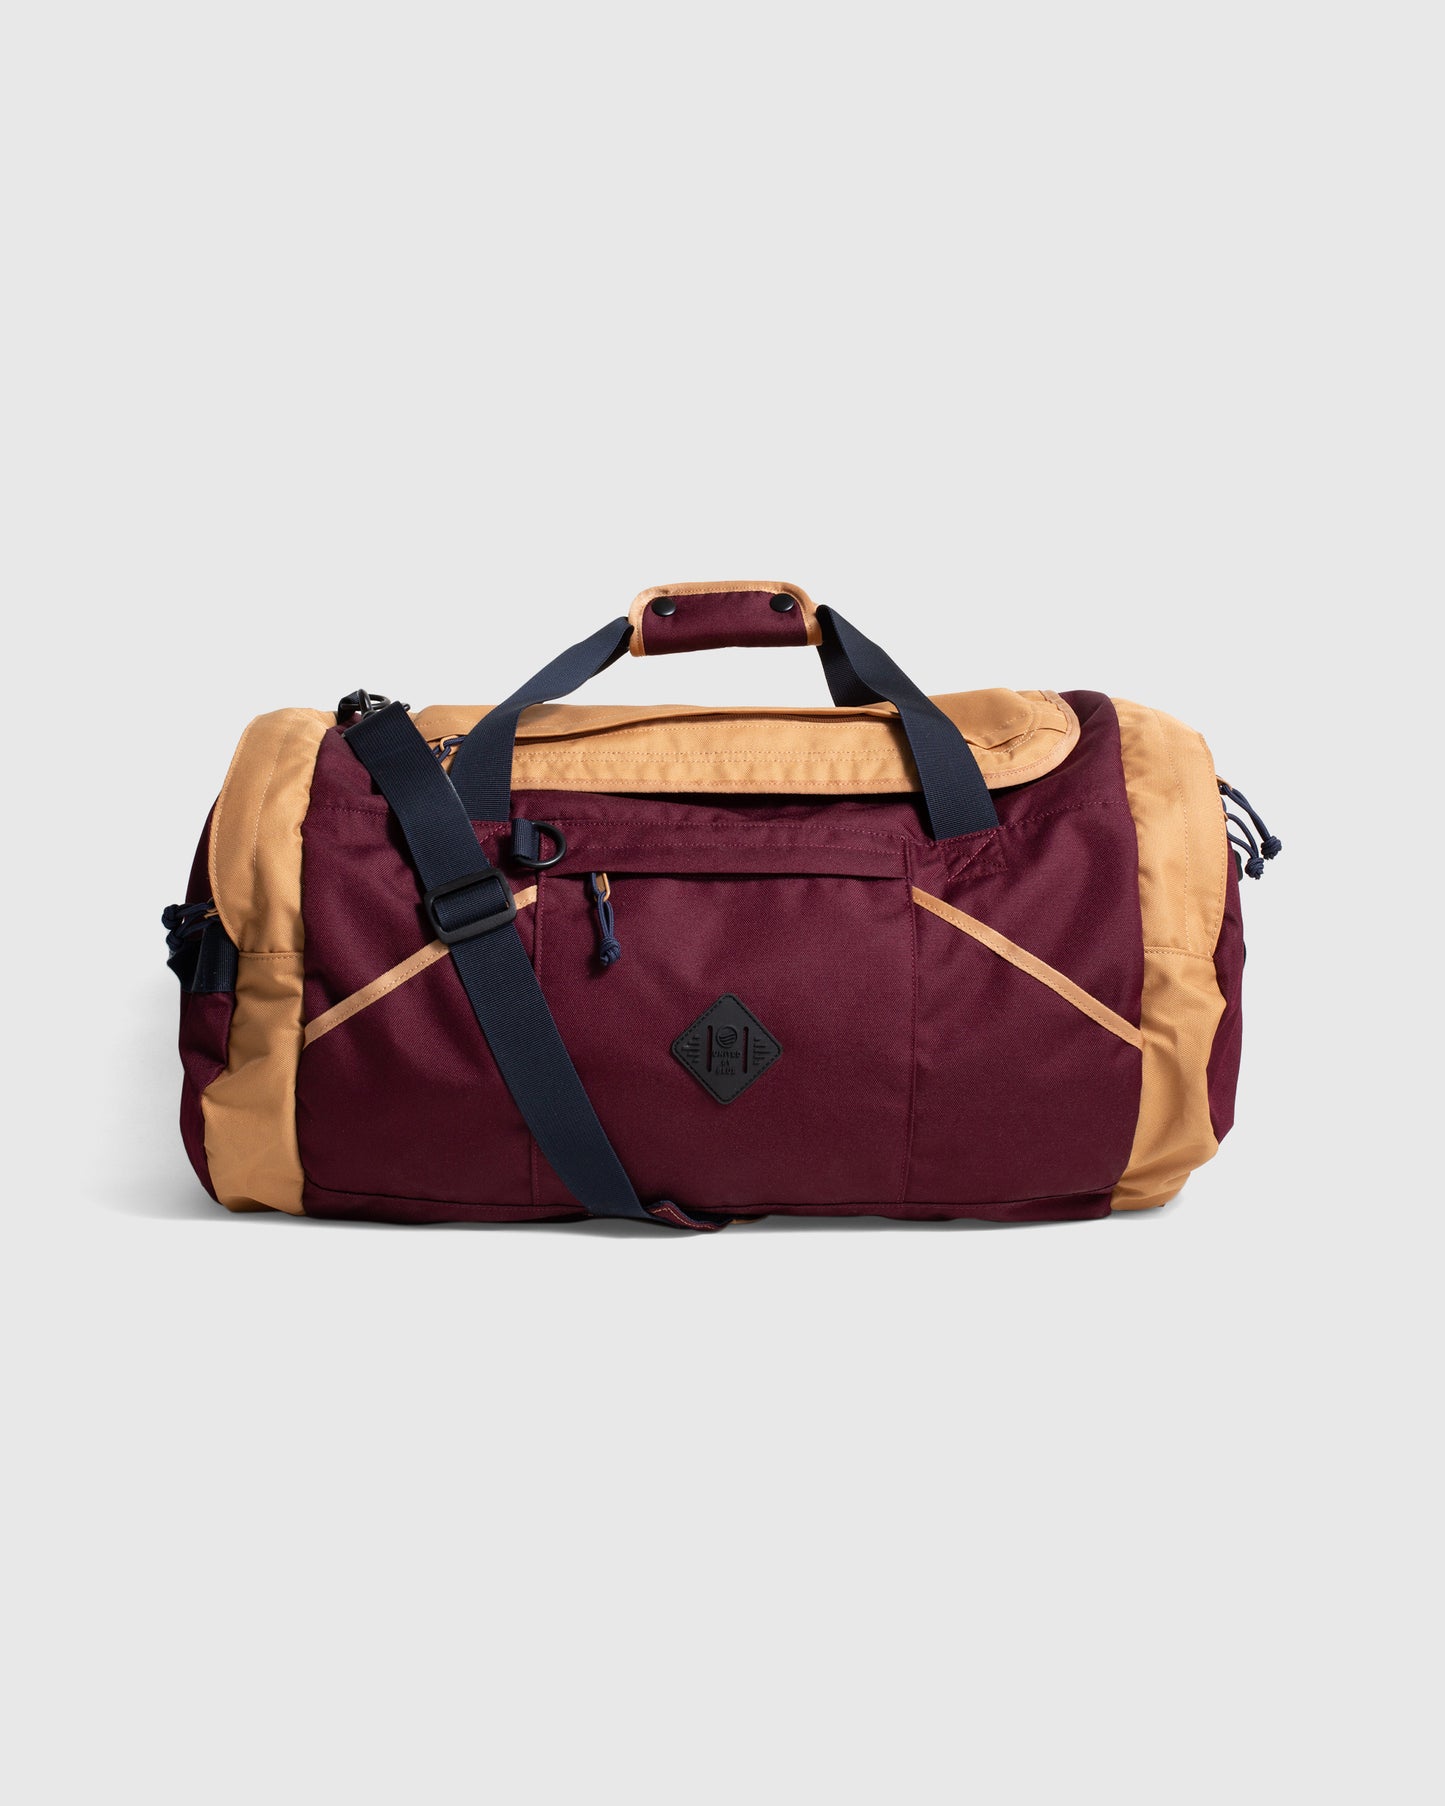 Maroon duffle bag by United by Blue